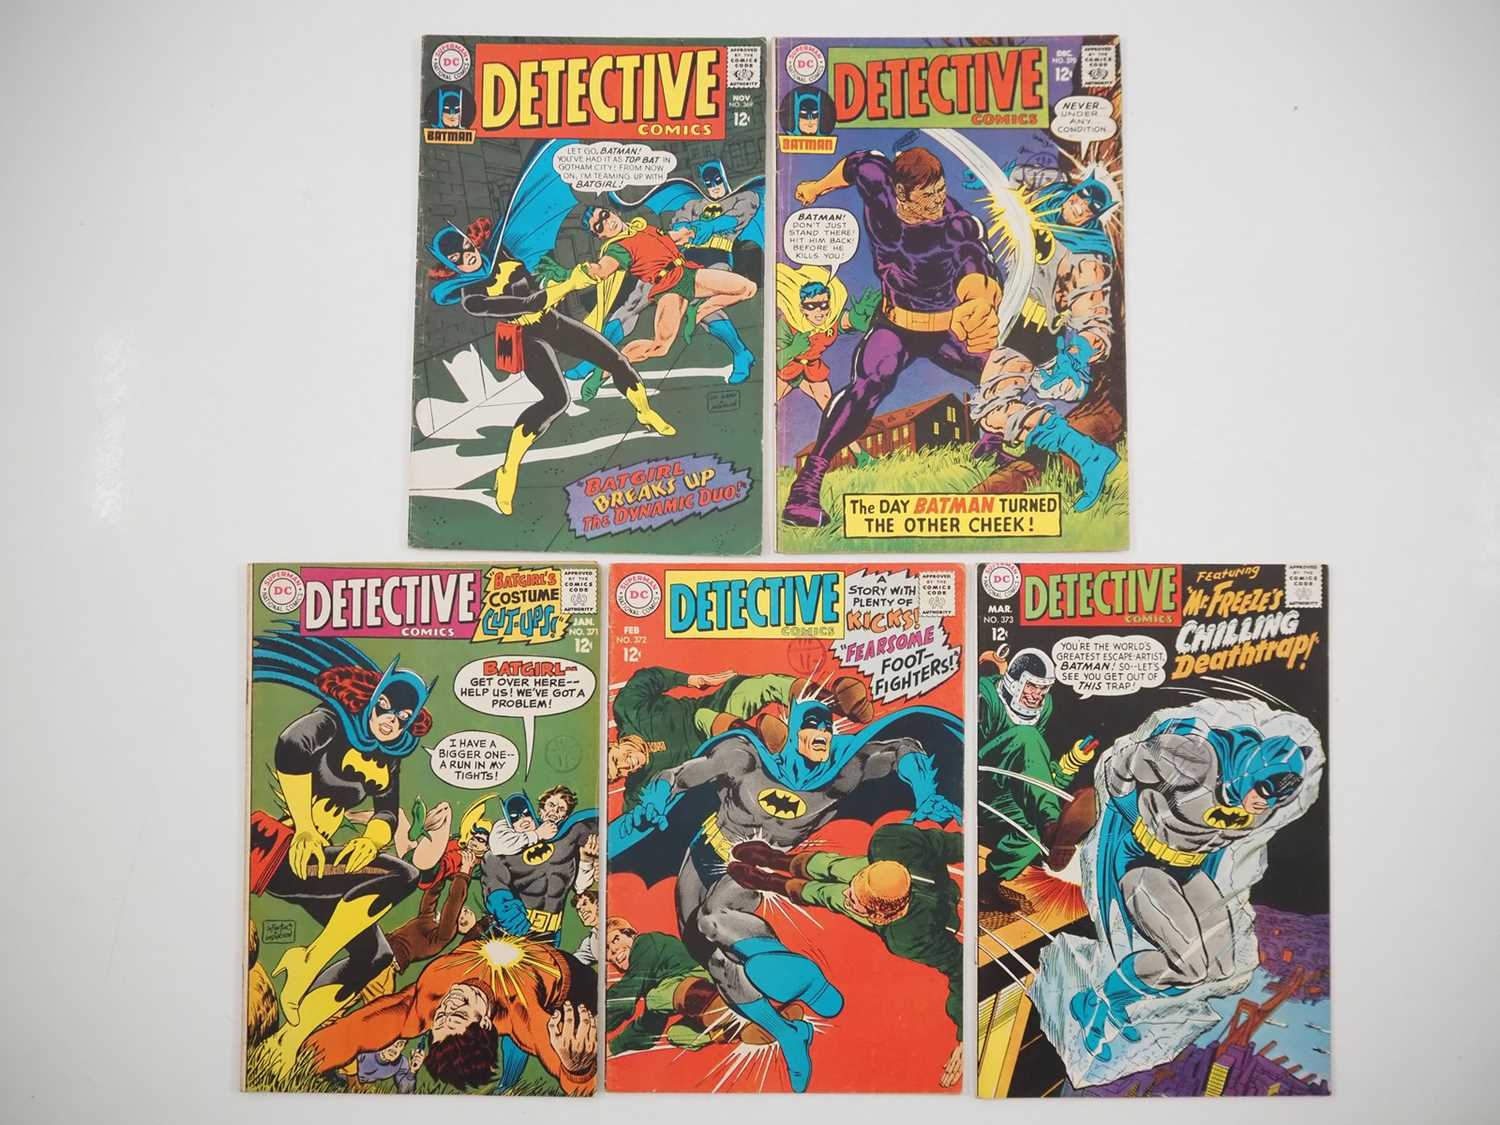 DETECTIVE COMICS #369, 370, 371, 372, 373 (5 in Lot) - (1967/1968 - DC) - Includes the first team-up